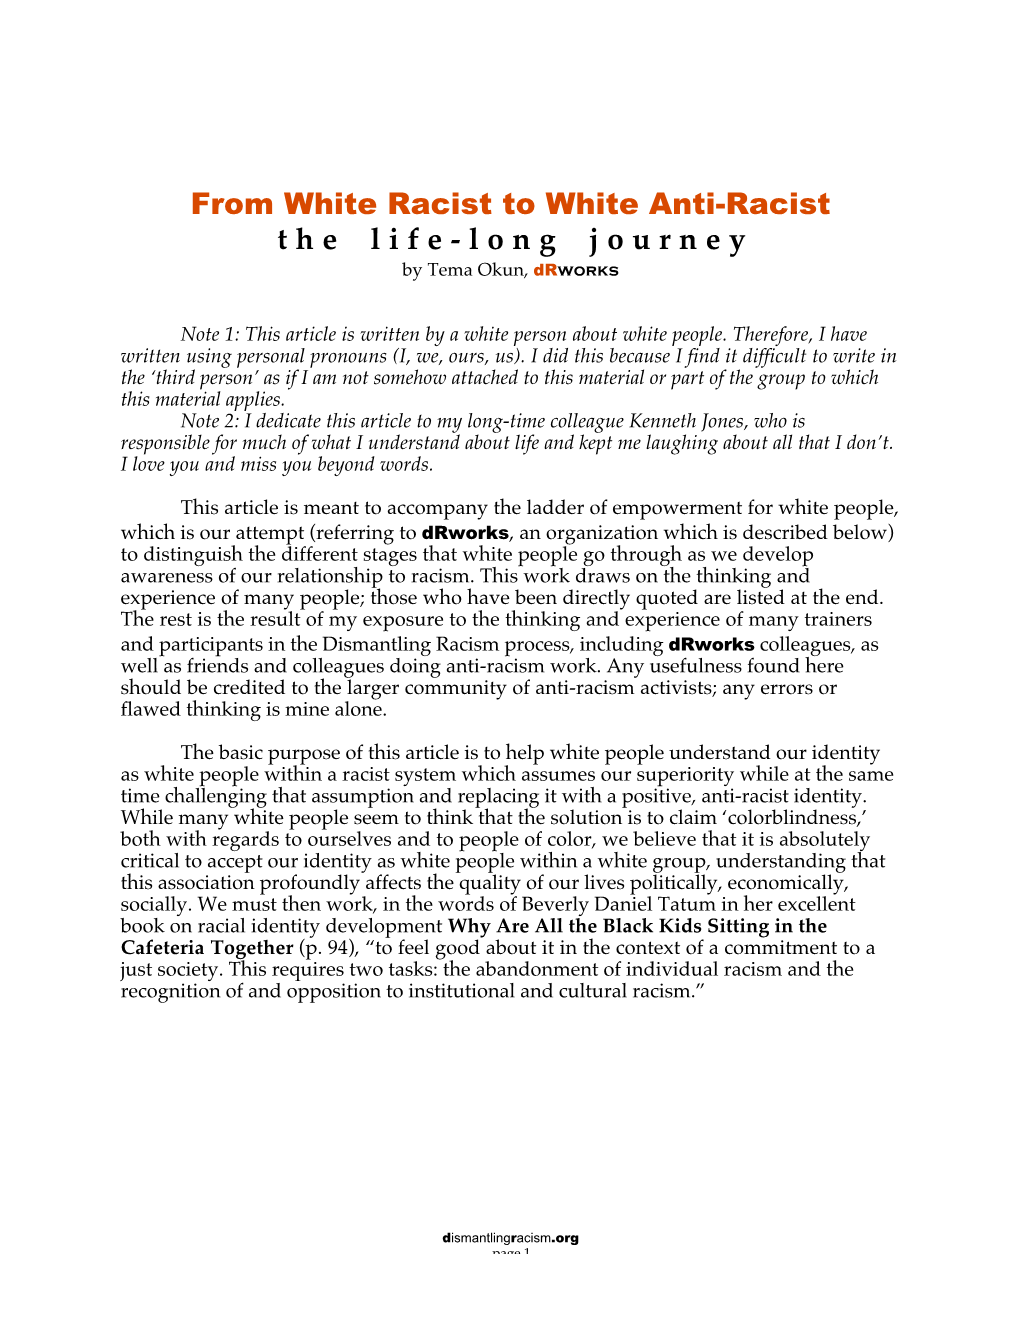 From White Racist to White Anti-Racist Thelife